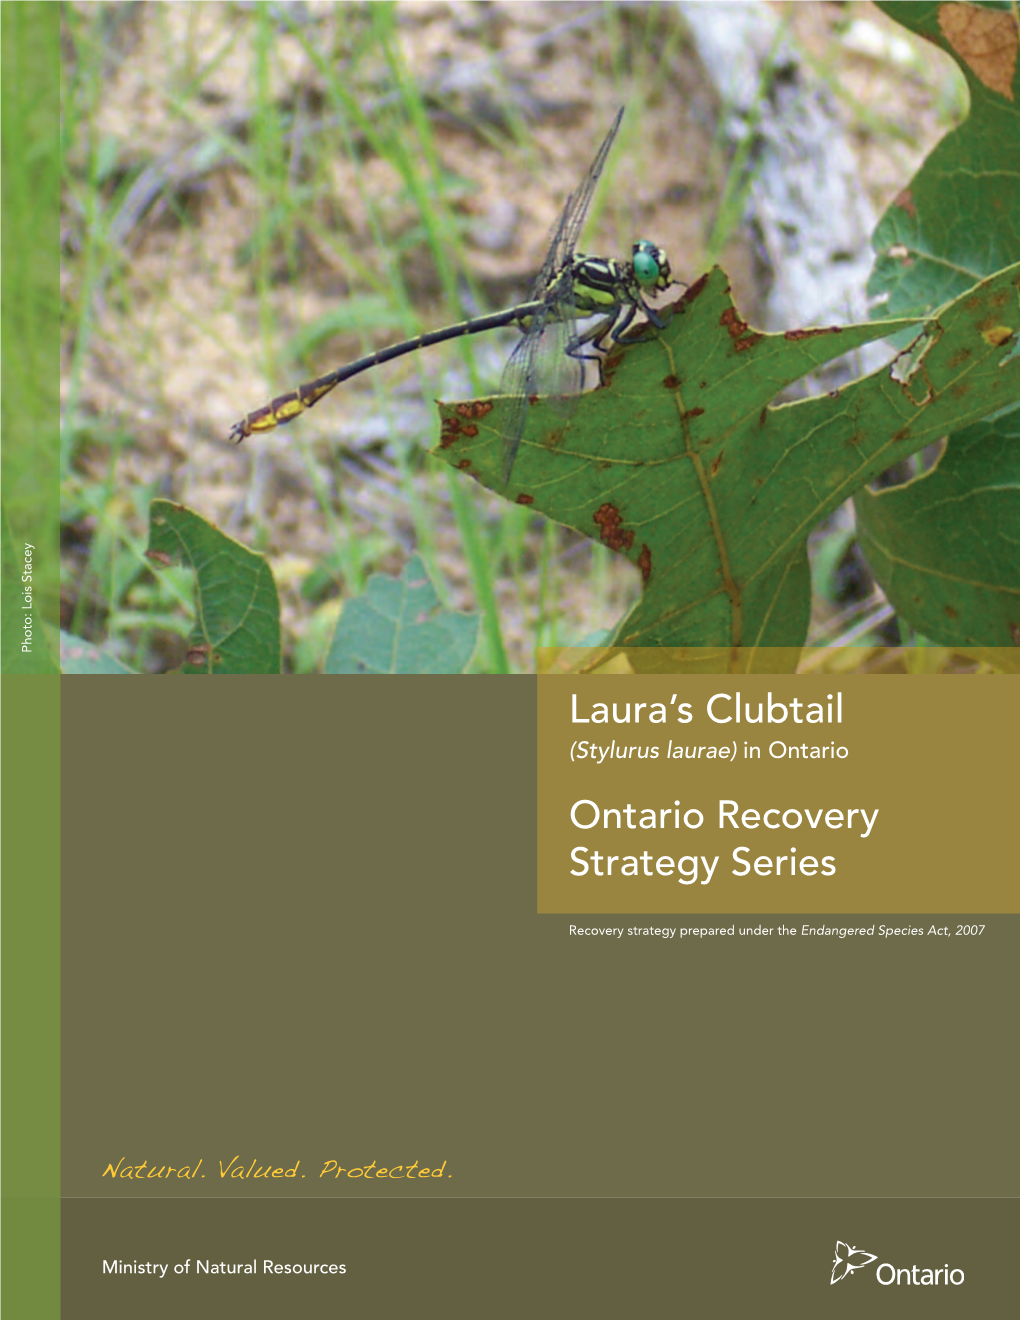 Recovery Strategy for Laura's Clubtail in Ontario